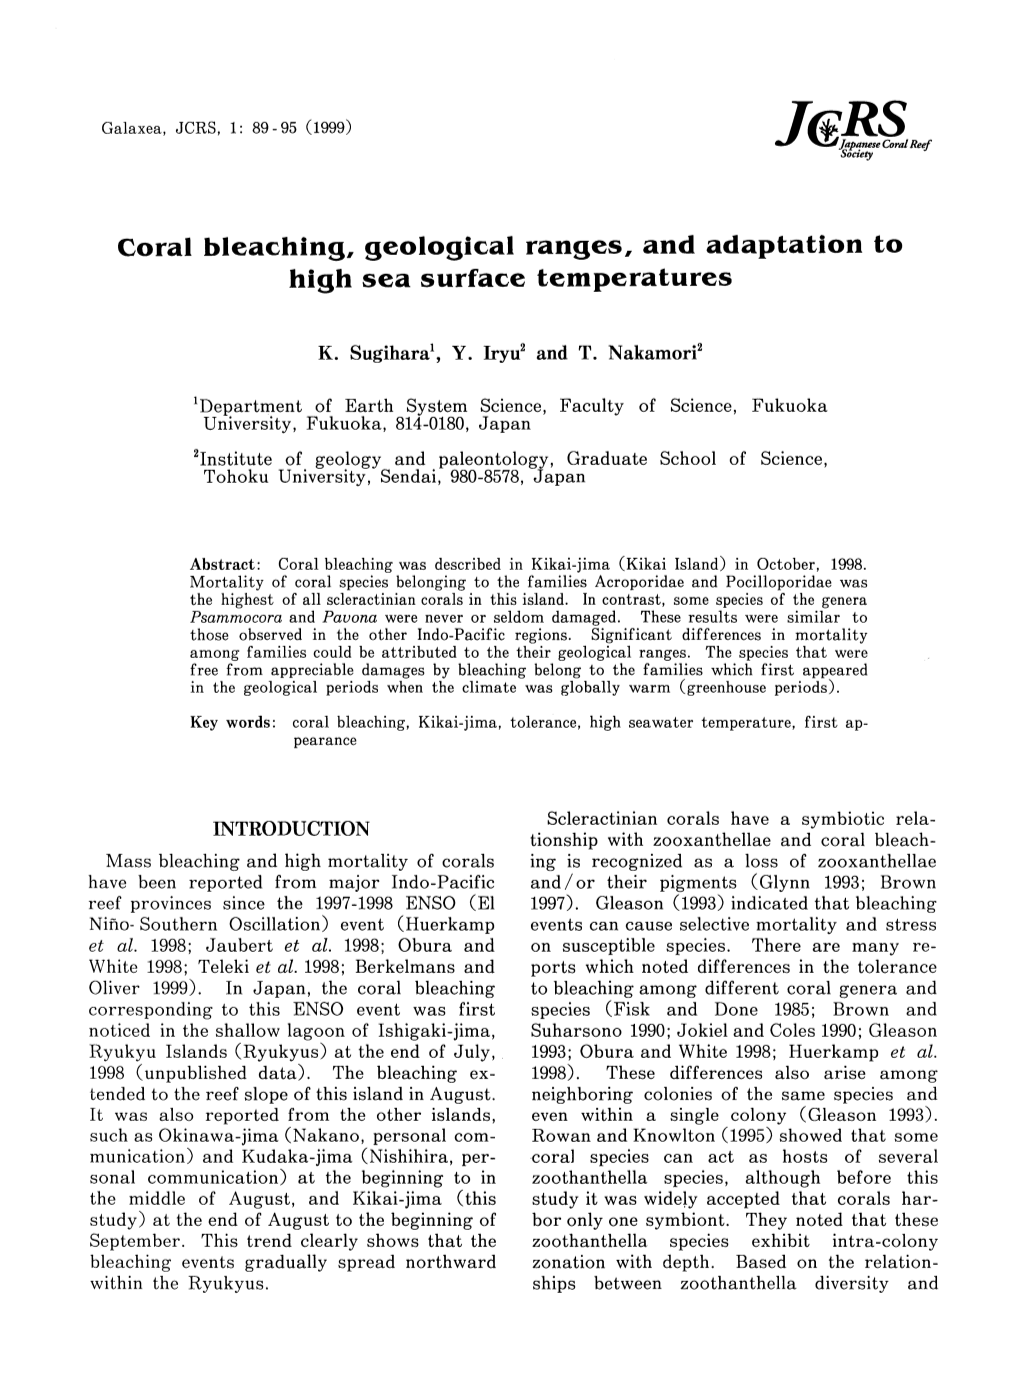 Coral Bleaching, Geological Ranges, and Adaptation to High Sea Surface Temperatures